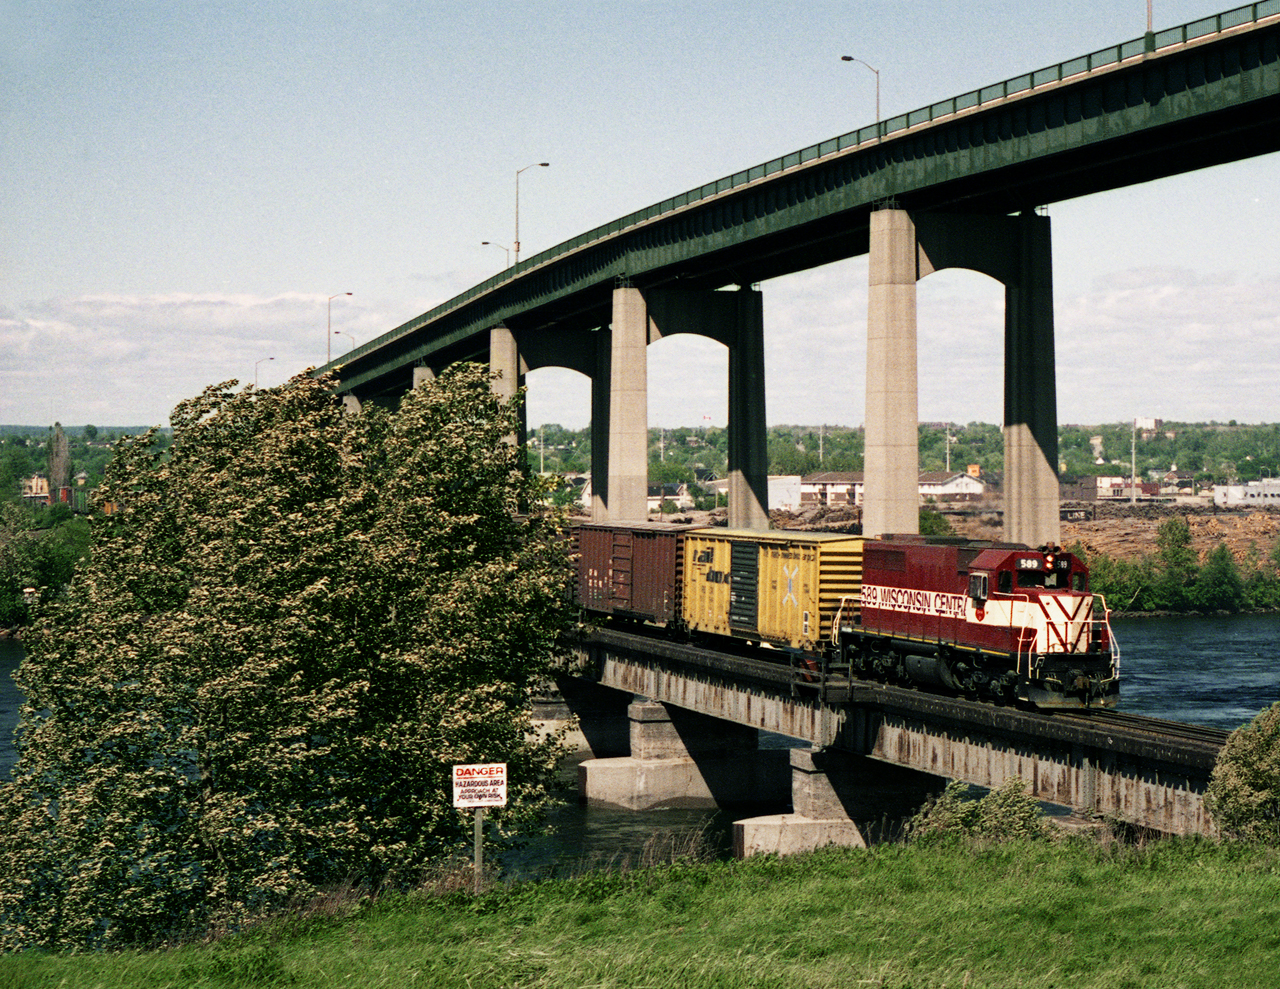 SDL39 589 with a transfer from Ontario heads back to Michigan crosses the main channel of the St. Mary's River and approaches the historic Canadian Canal